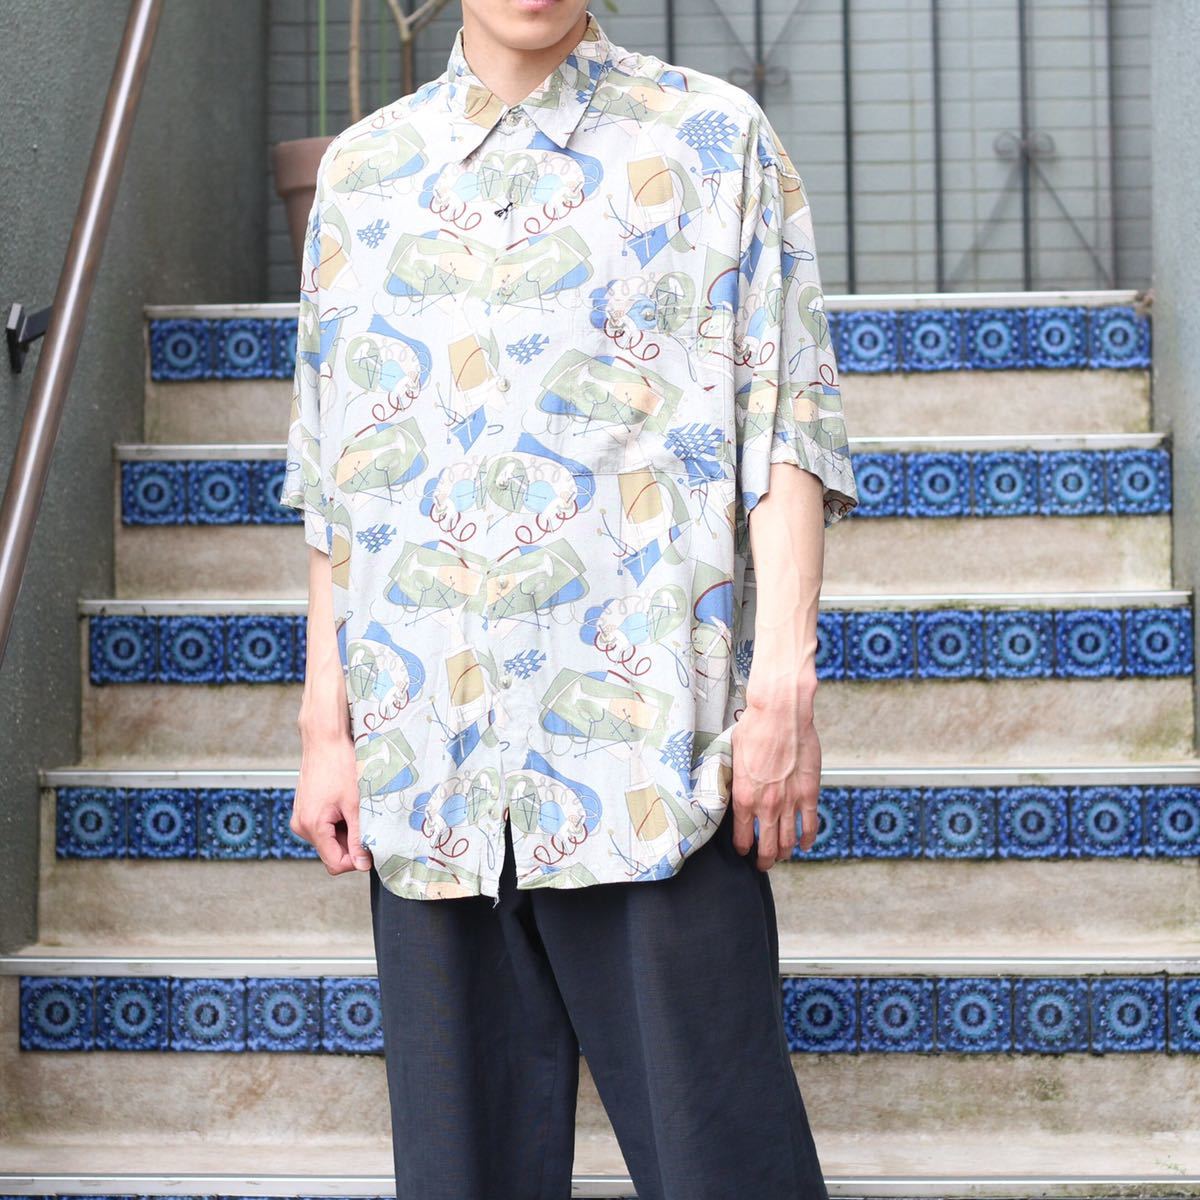 USA VINTAGE HALF SLEEVE COCKTAIL PATTERNED RAYON SHIRT/アメリカ古着半袖カクテル柄レーヨンシャツ_画像2